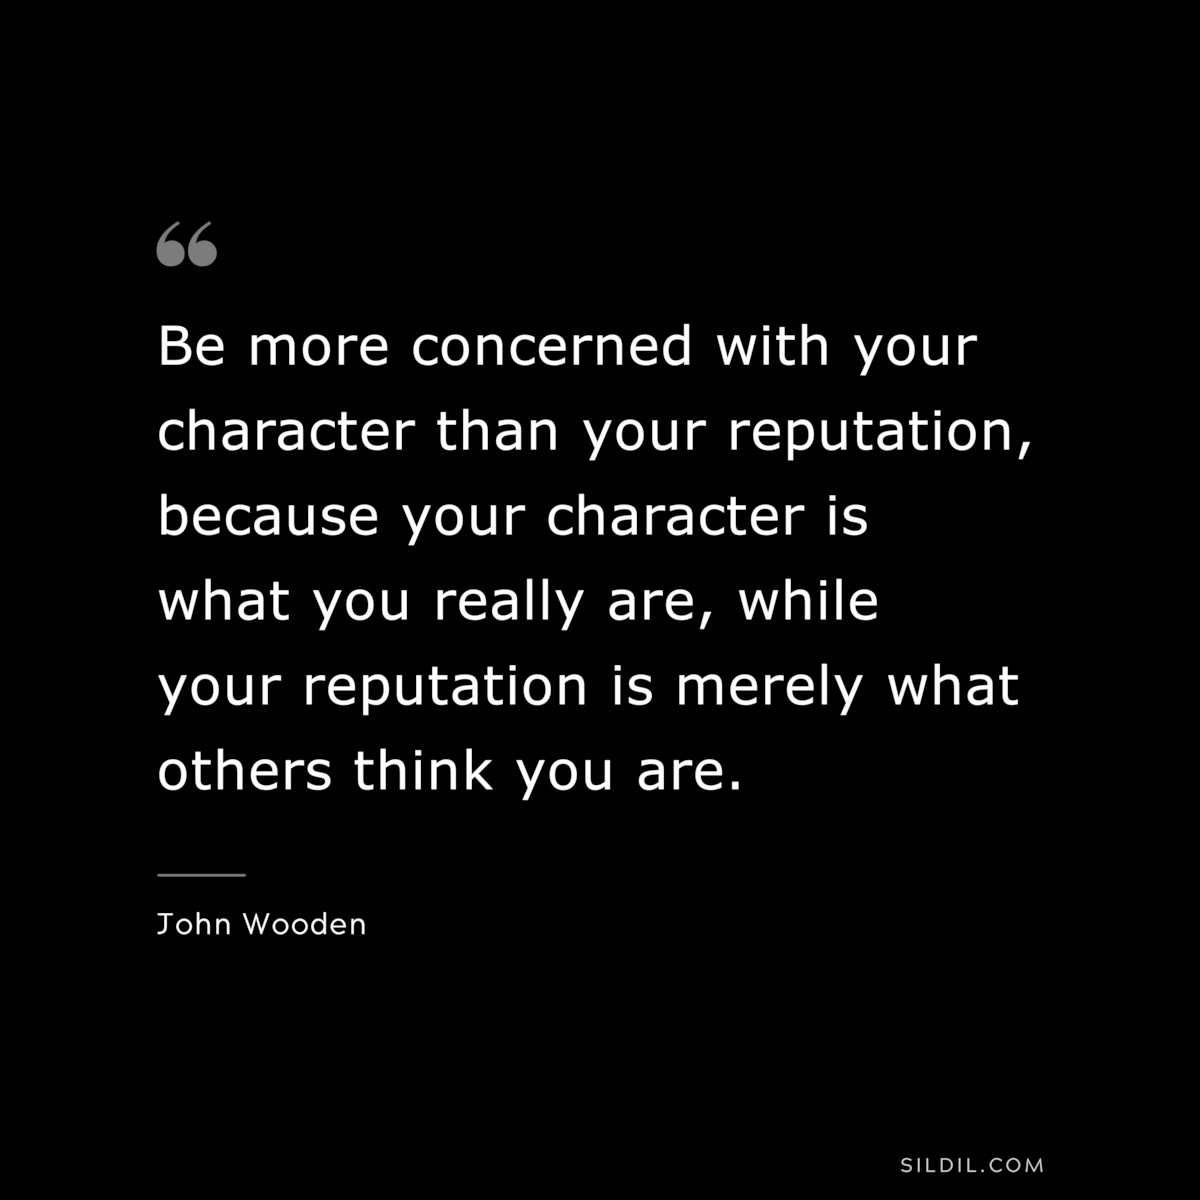 Be more concerned with your character than your reputation, because your character is what you really are, while your reputation is merely what others think you are. ― John Wooden